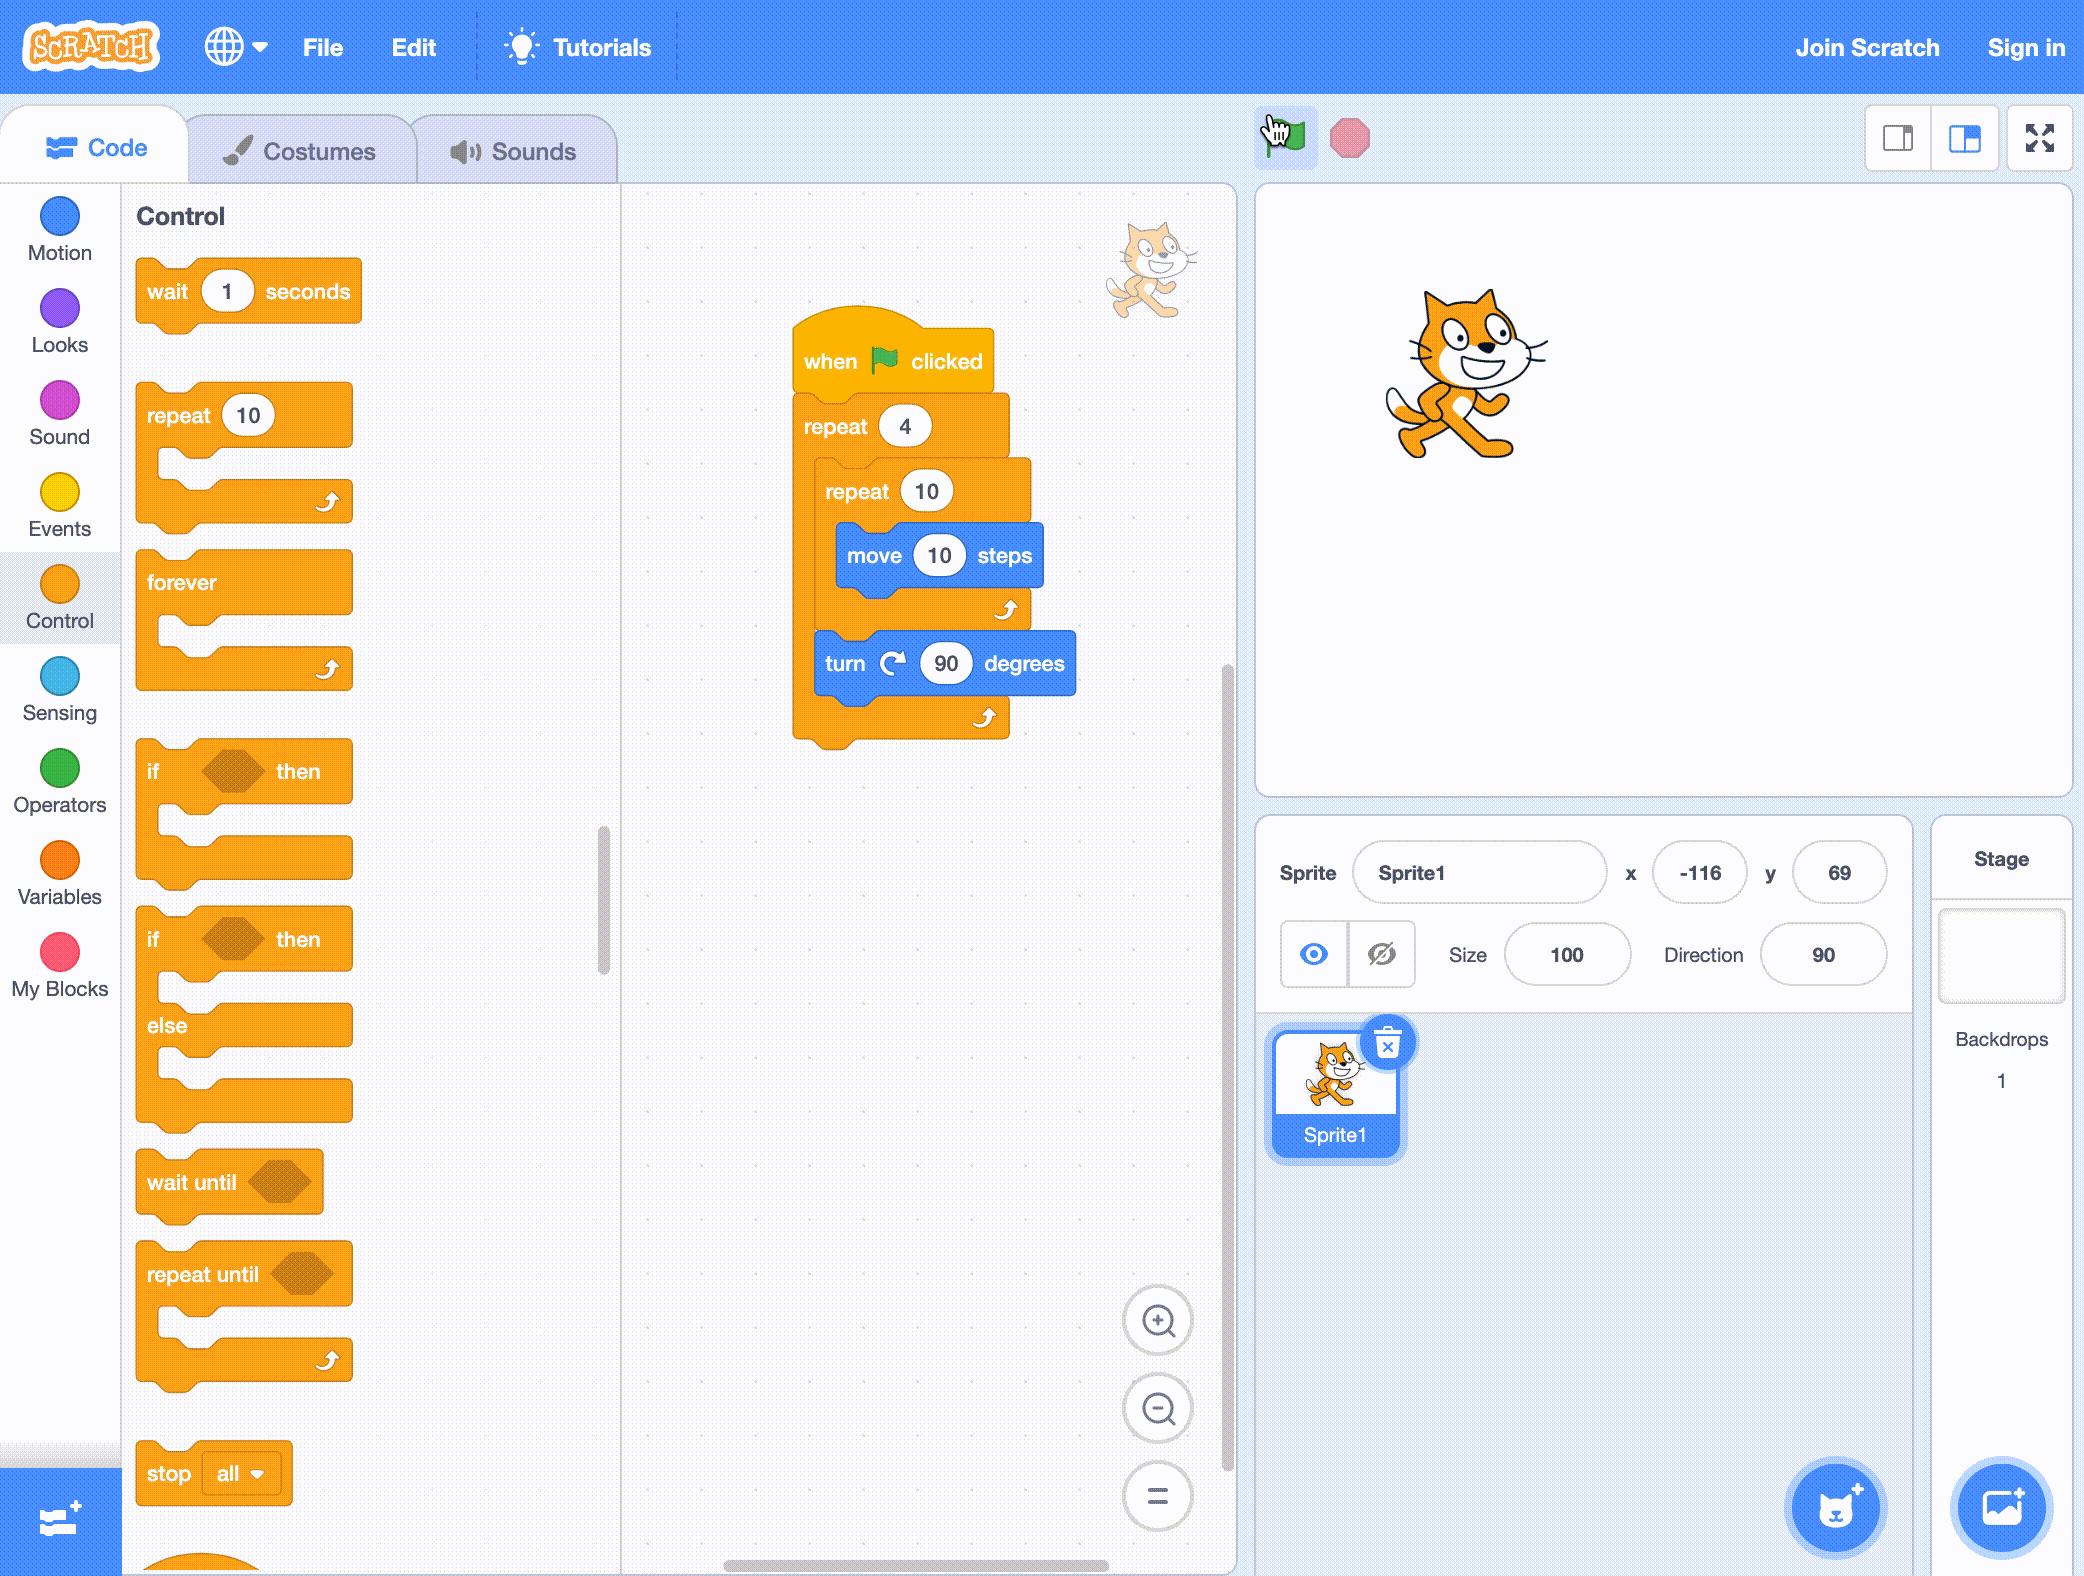 How to use Scratch?